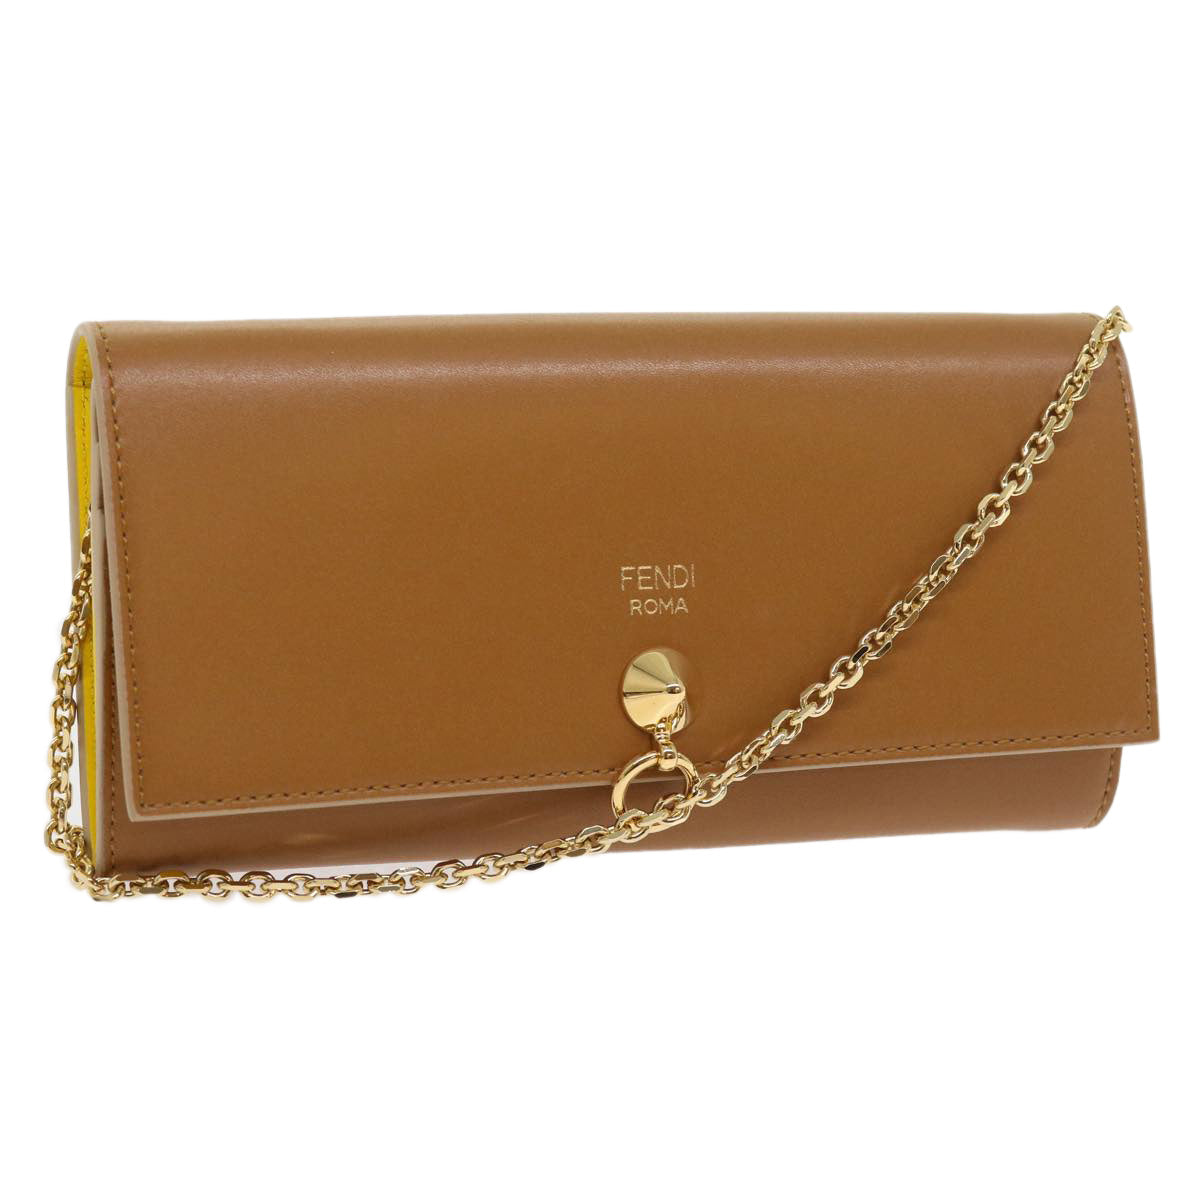 FENDI Chain Shoulder Long Wallet Leather Yellow Brown Auth 54537